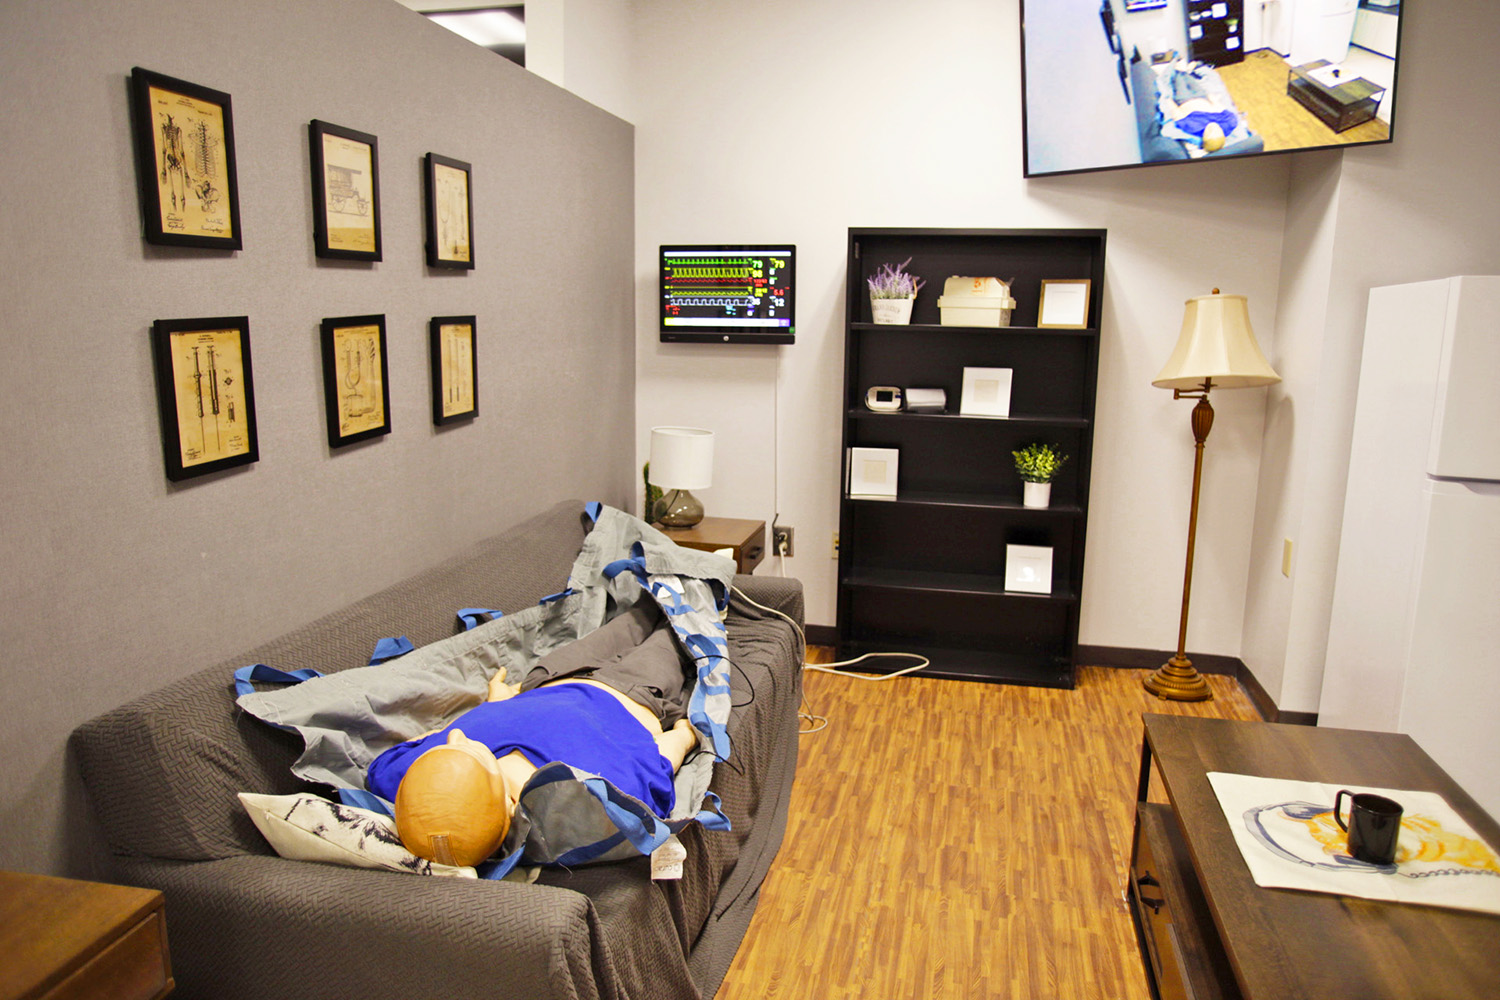 High fidelity medical mannequin lies supine on a sofa in the living room of the Emergency Medical Services simulation suite. The mannequin’s medical symptoms are controlled by instructors in an adjacent control room. Vital signs are displayed on the computer monitor on the far wall and images captured by a PTZ camera in the room appear on the 55” flat panel display in the upper corner of the far wall.